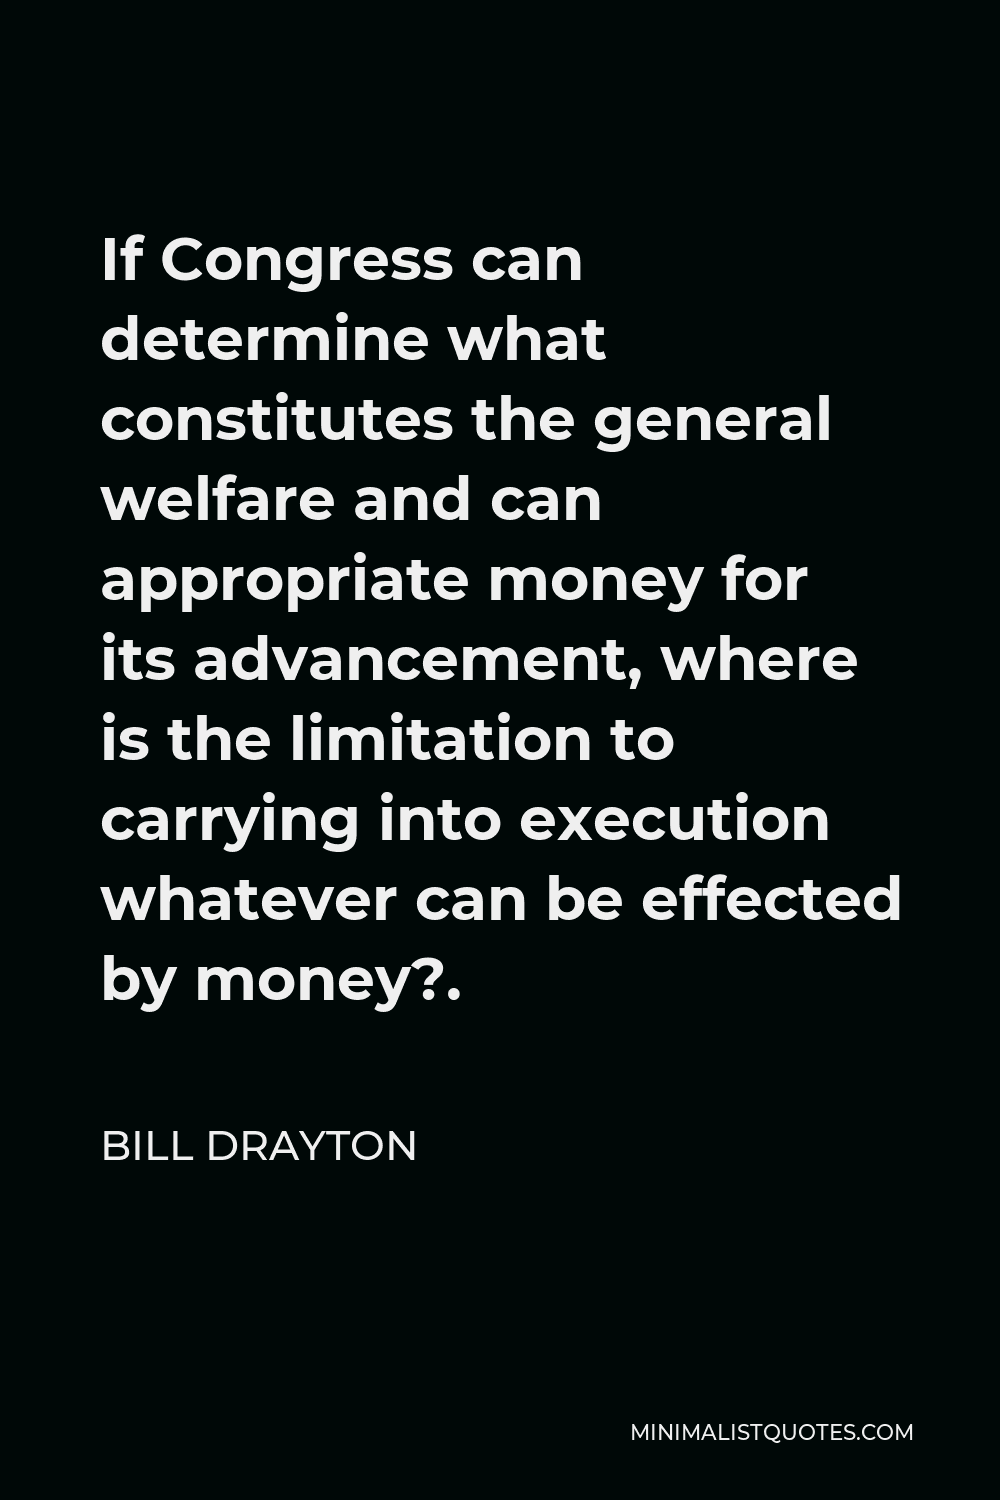 Bill Drayton Quote - If Congress can determine what constitutes the general welfare and can appropriate money for its advancement, where is the limitation to carrying into execution whatever can be effected by money?.